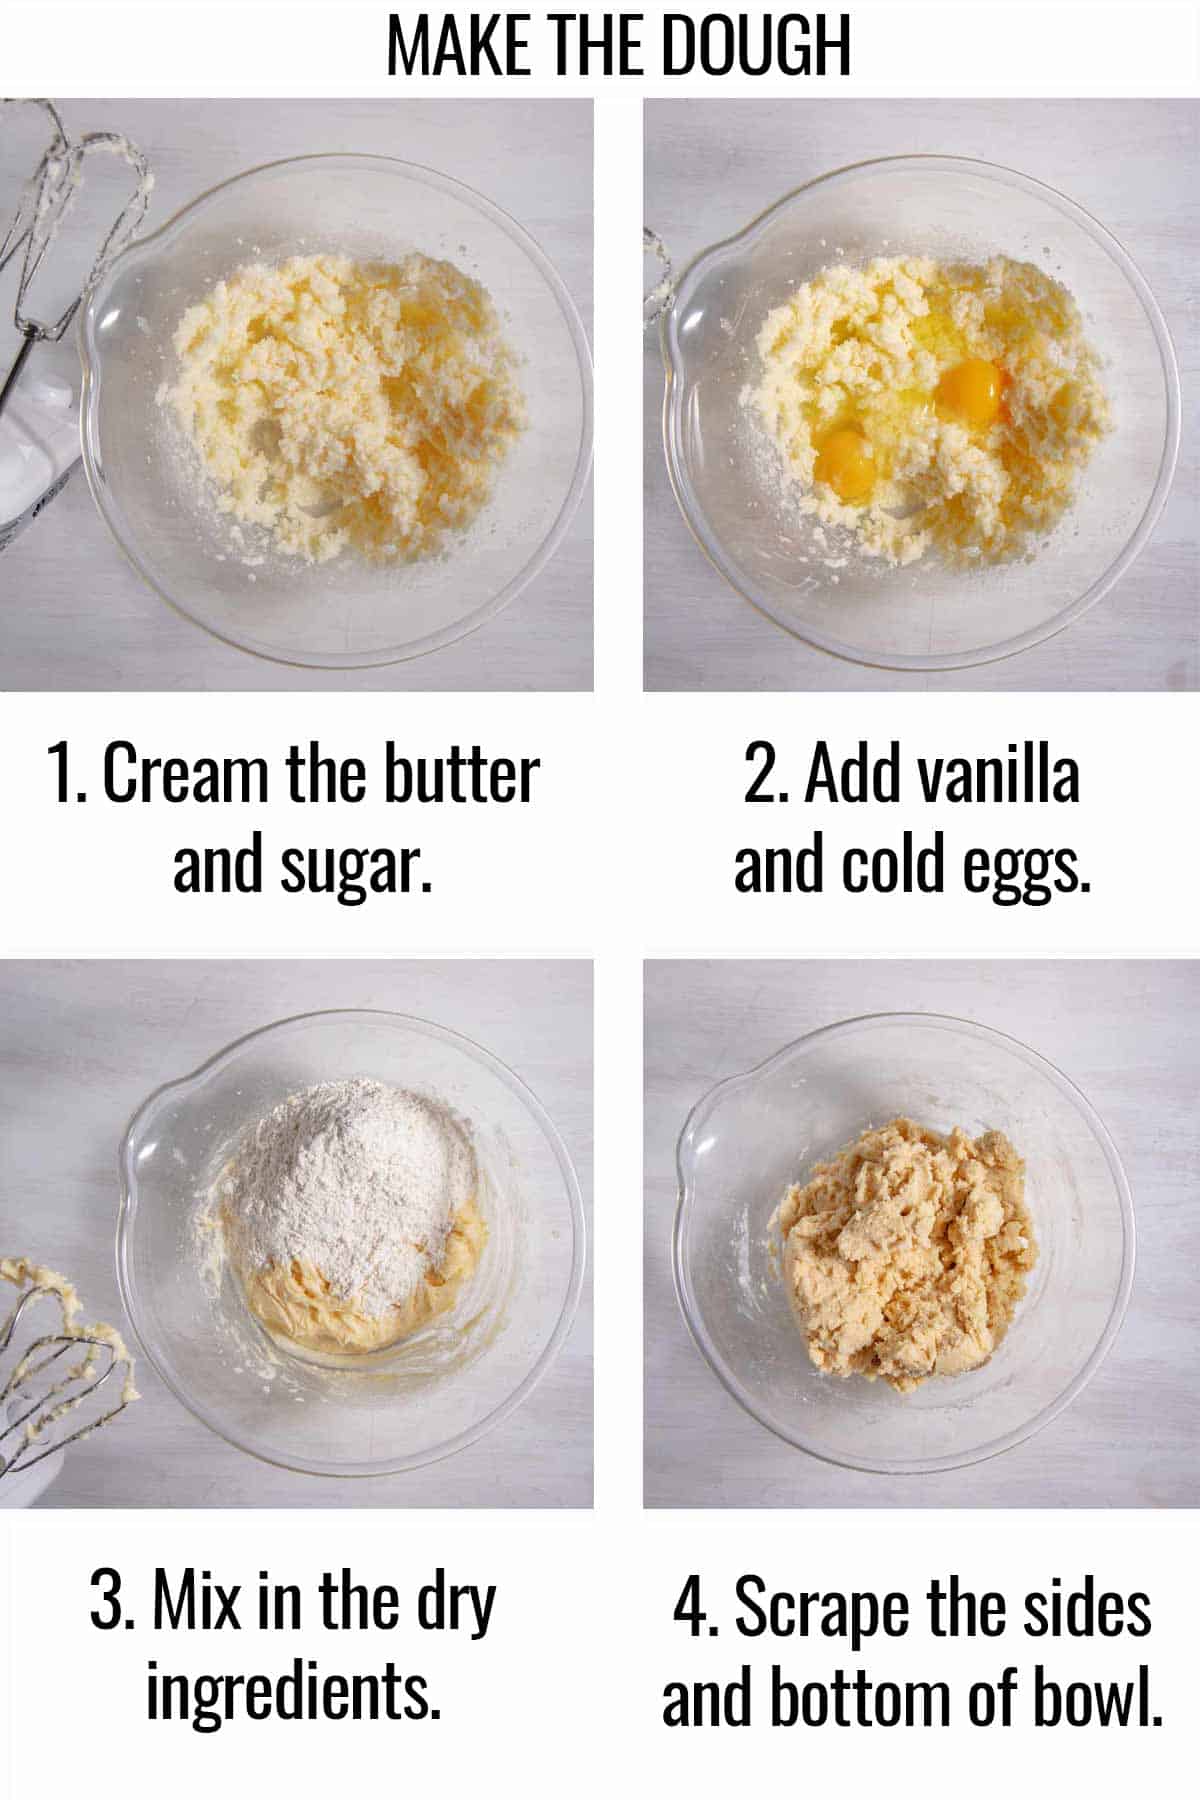 Four process photos showing the steps to make the snickerdoodle dough. First, cream the butter and sugar. Second, add the vanilla and cold eggs. Third, mix in the dry ingredients. Fourth scrapes the sides and bottom of the bowl.